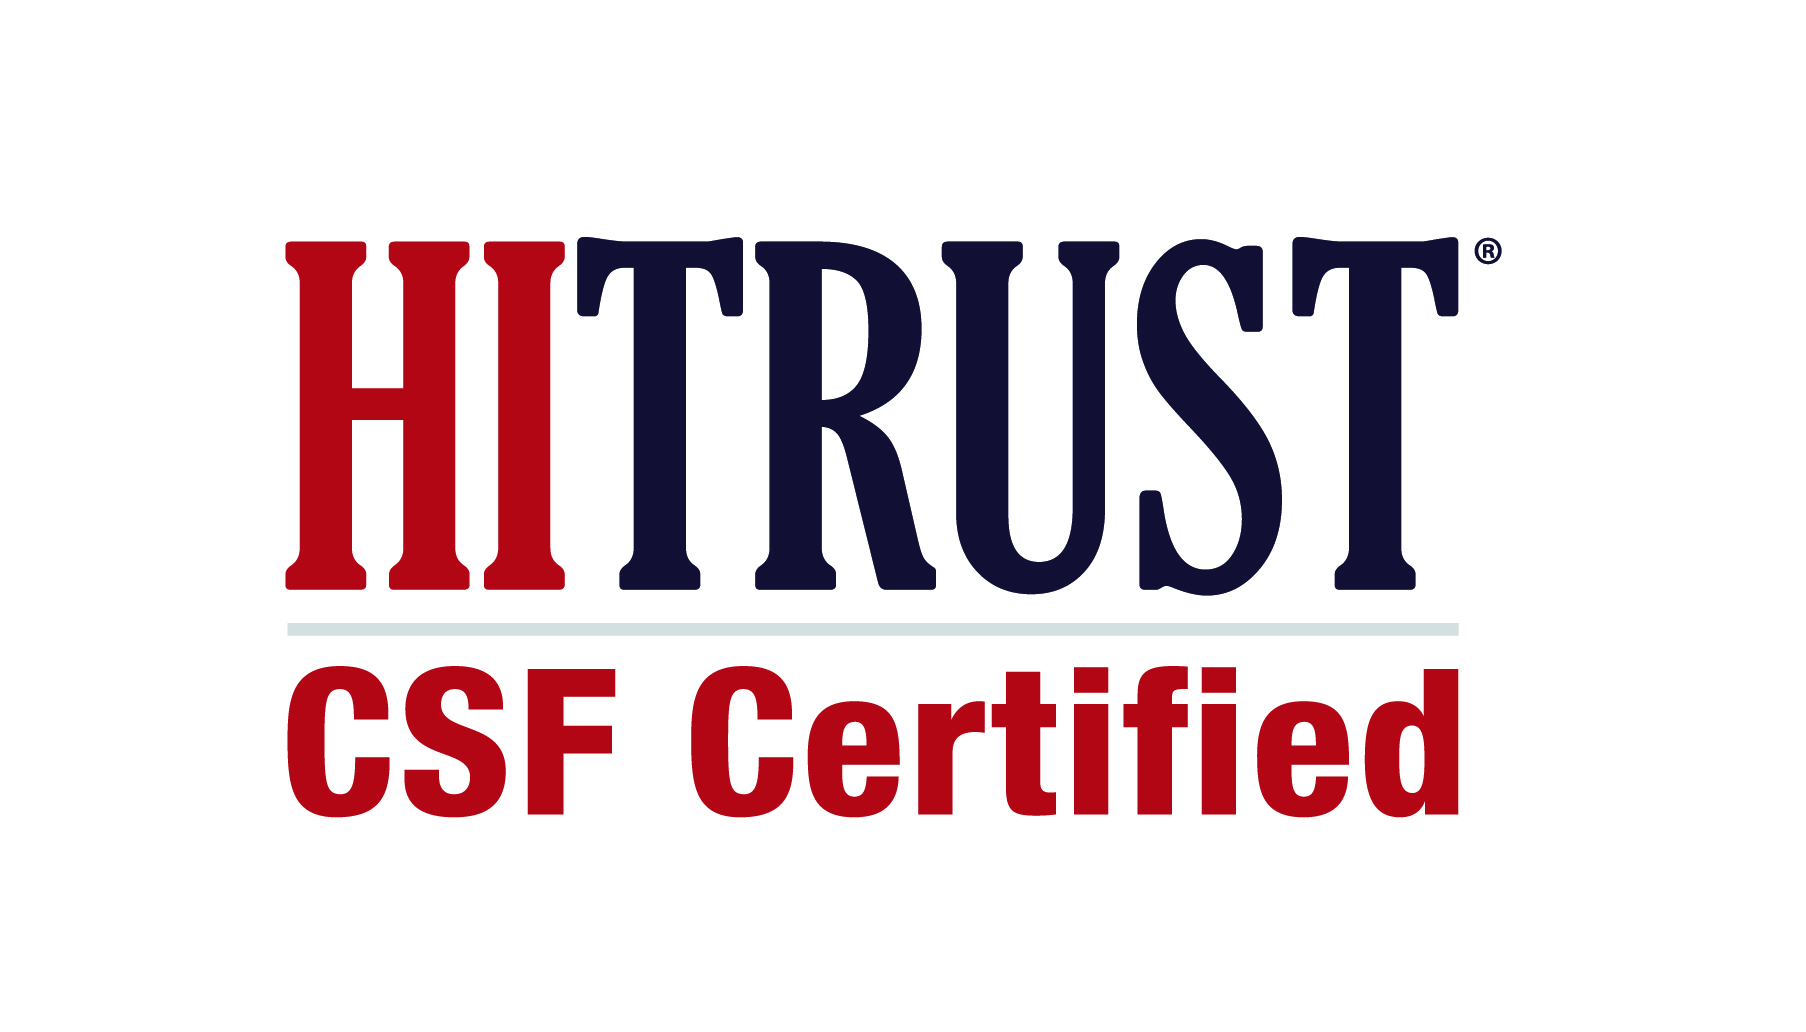 HITRUST Certification for Data Security and Minimized Risk